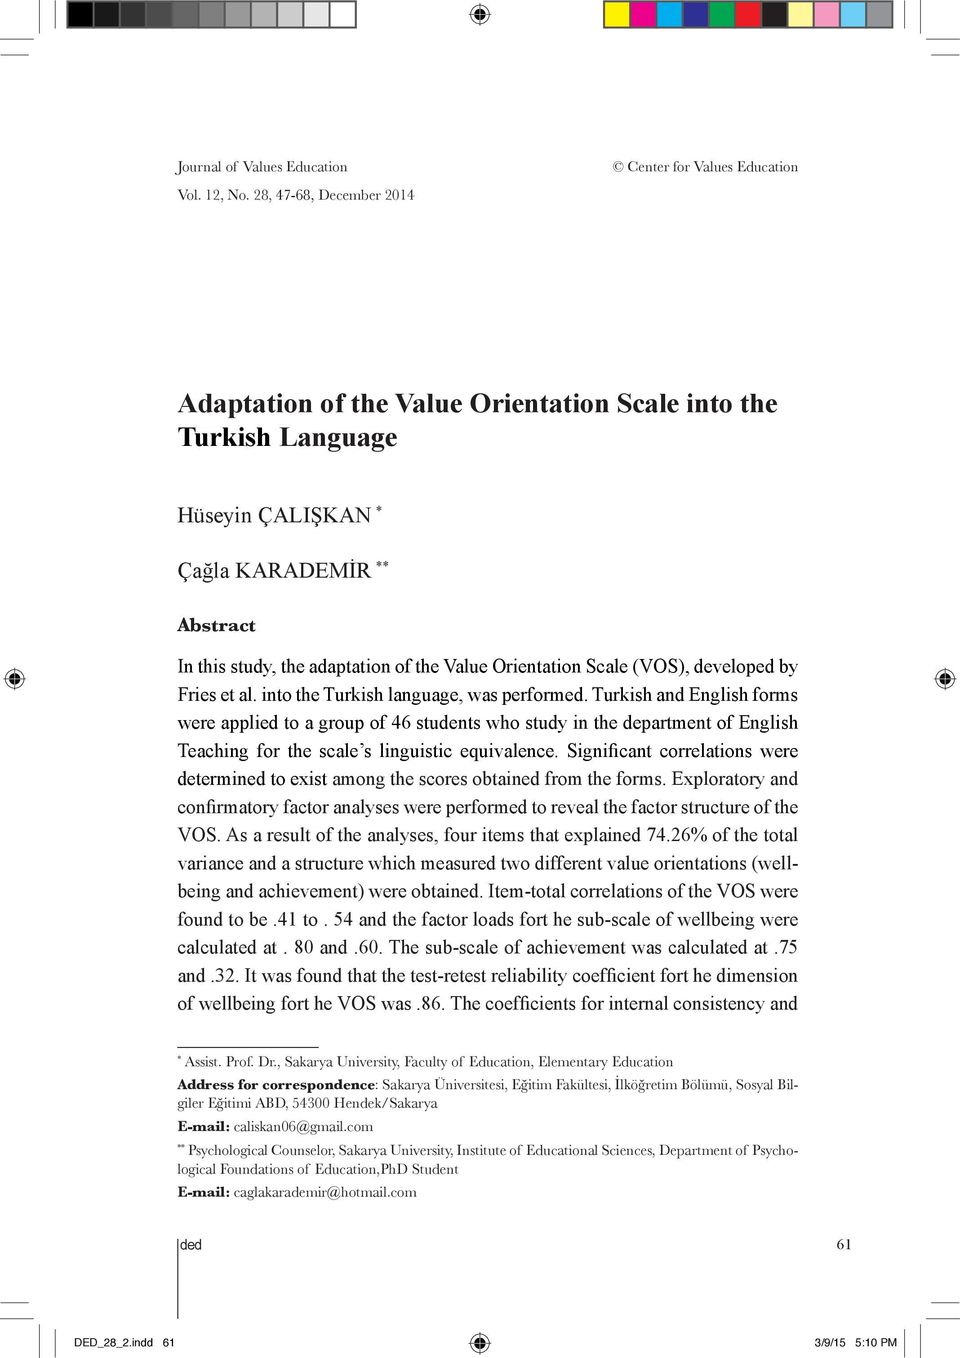 adaptation of the Value Orientation Scale (VOS), developed by Fries et al. into the Turkish language, was performed.